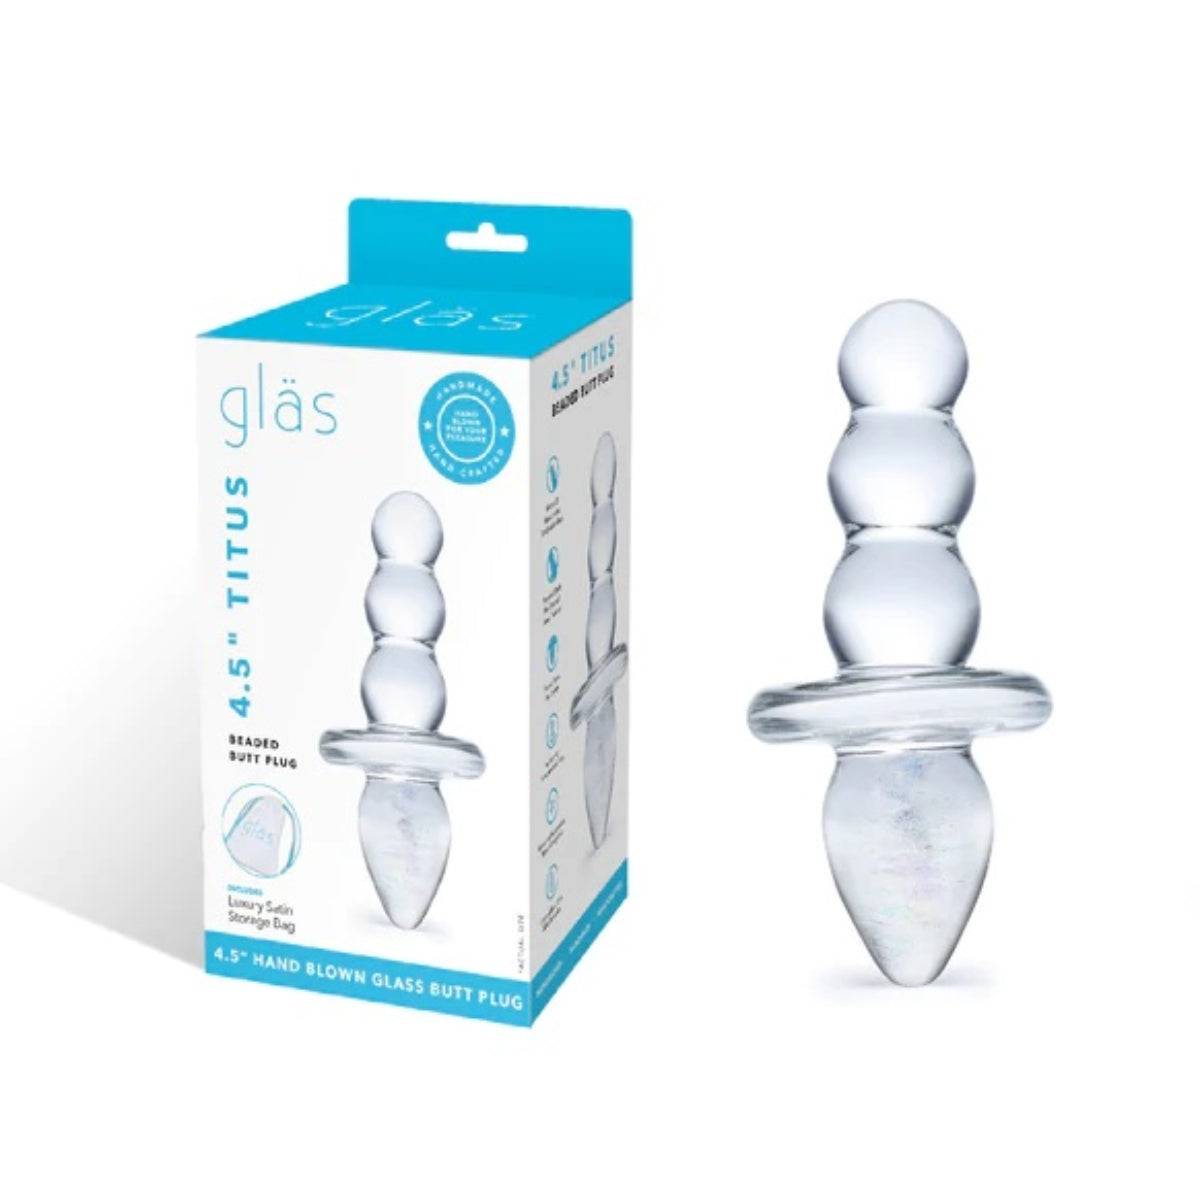 Glas Titus Beaded Butt Plug Clear 4.5 Inch - Simply Pleasure